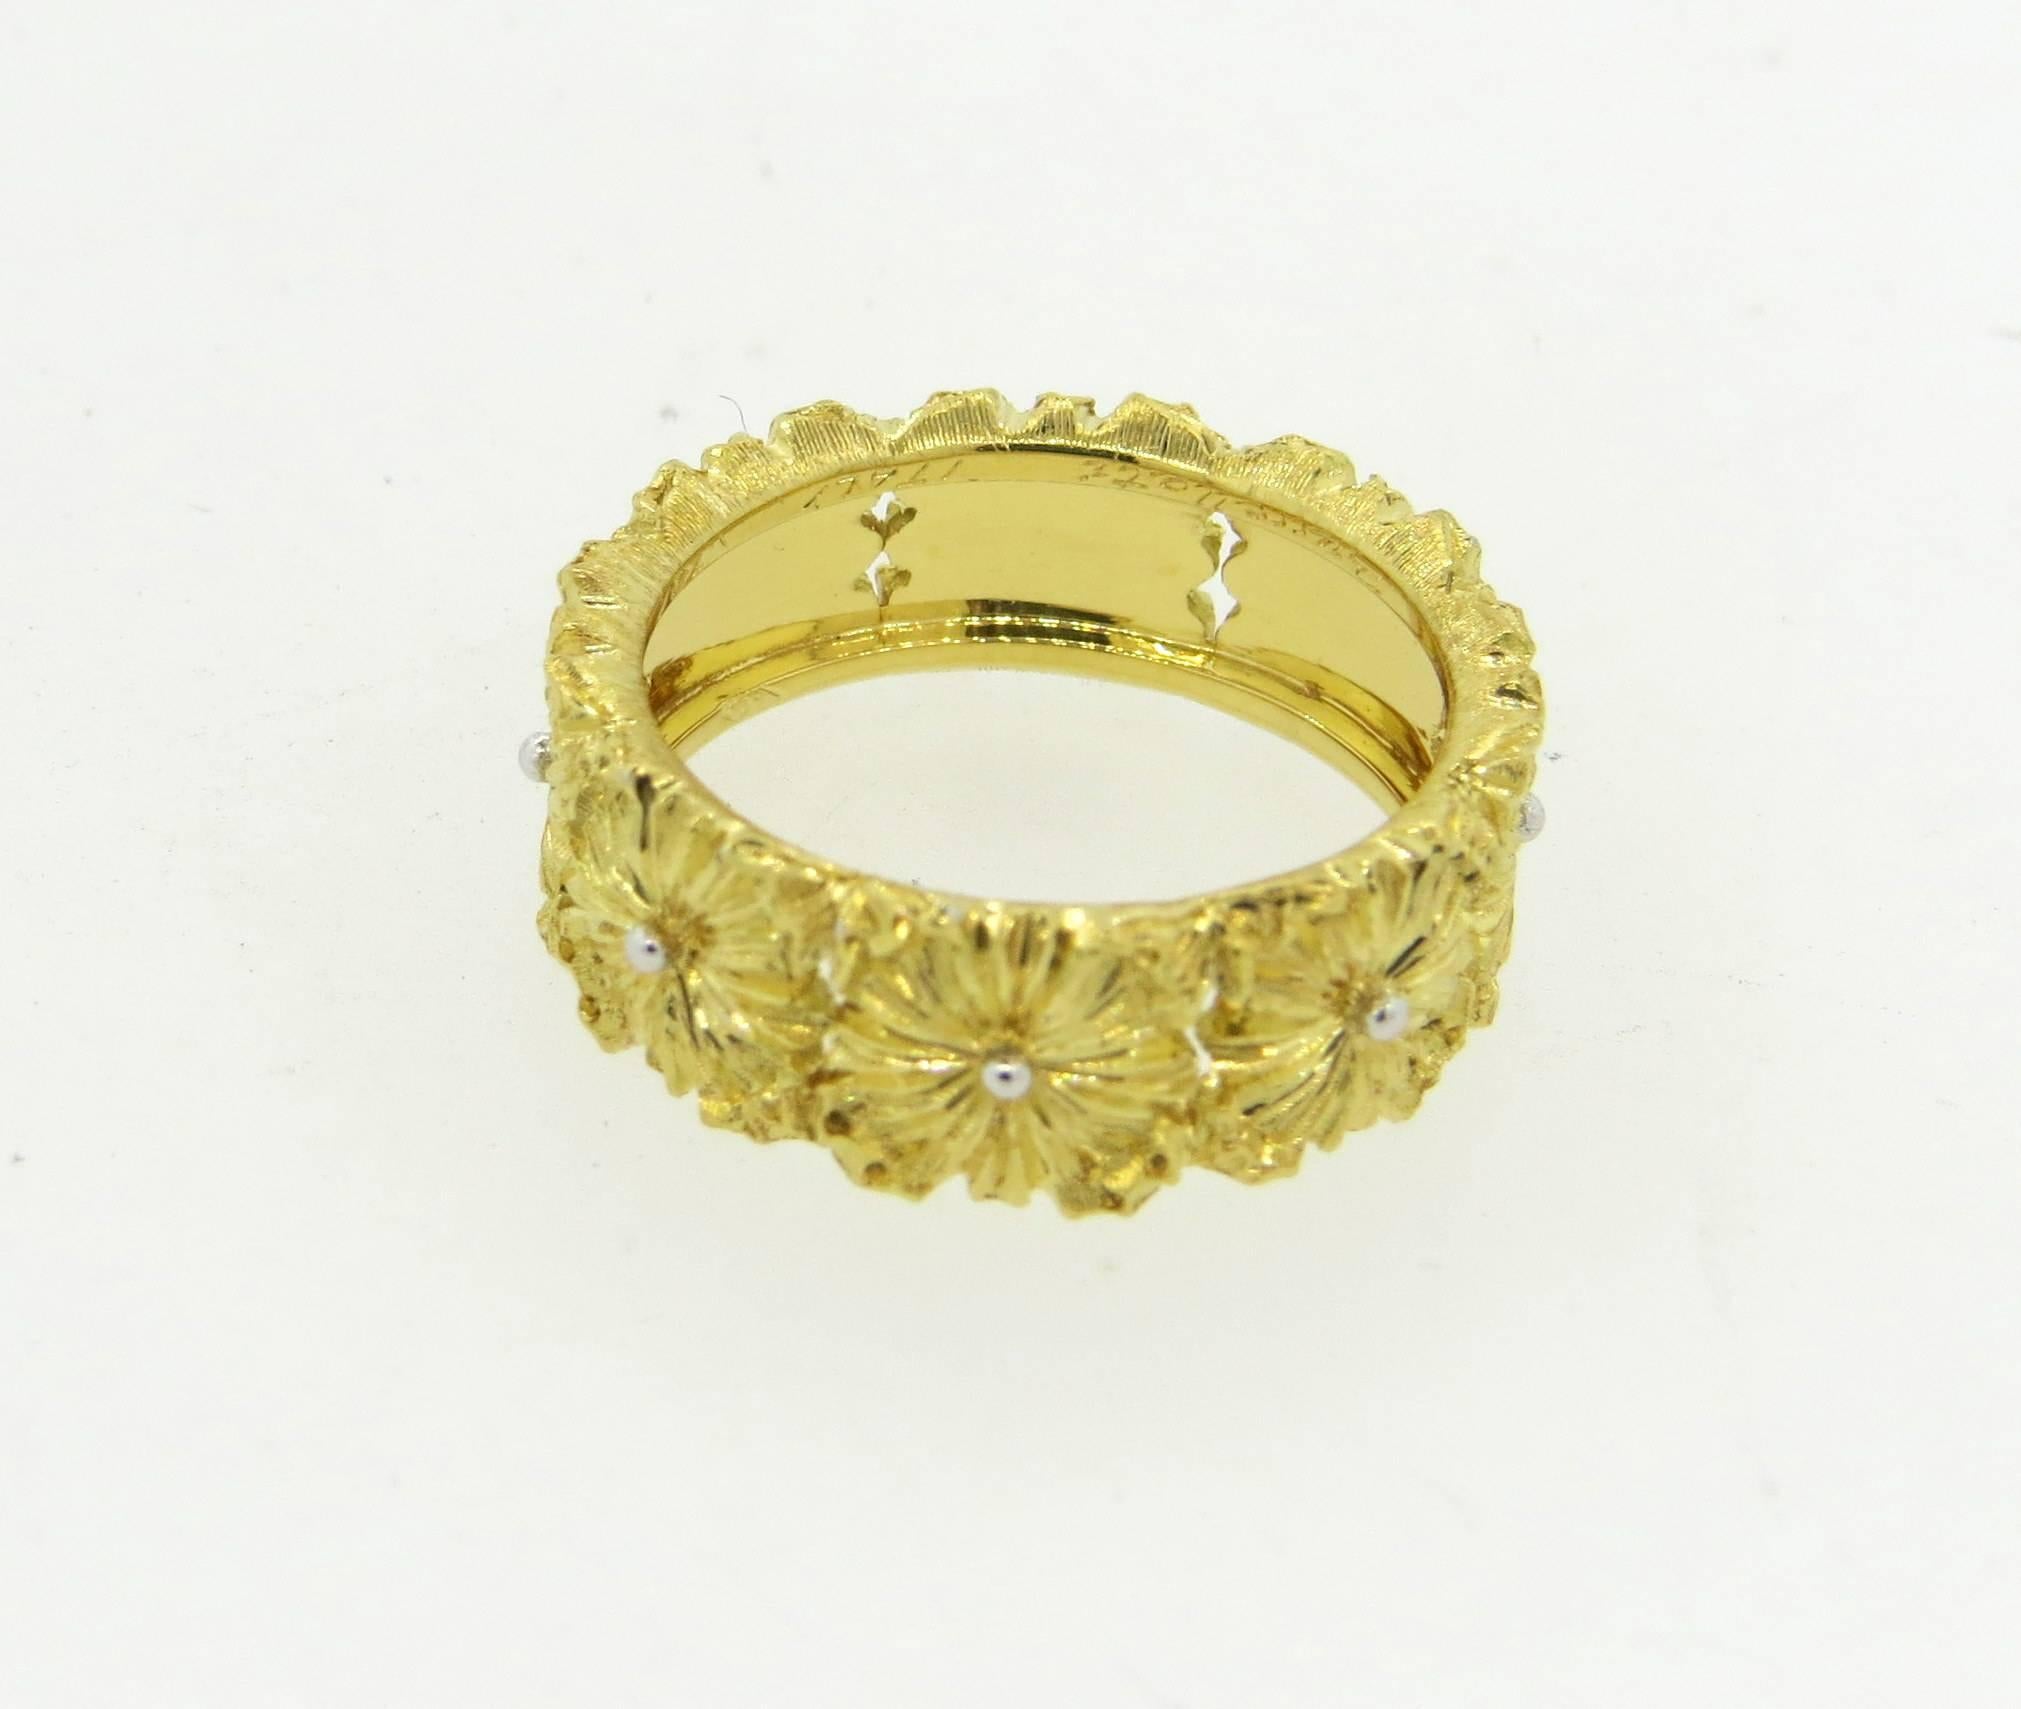 18k yellow and white gold flower band ring, crafted by Buccellati. Ring is a size 6, ring is 7.1mm wide. Marked: 18k, Buccellati. Weight of the piece - 6.3 grams
Comes with original Buccellati paperwork 